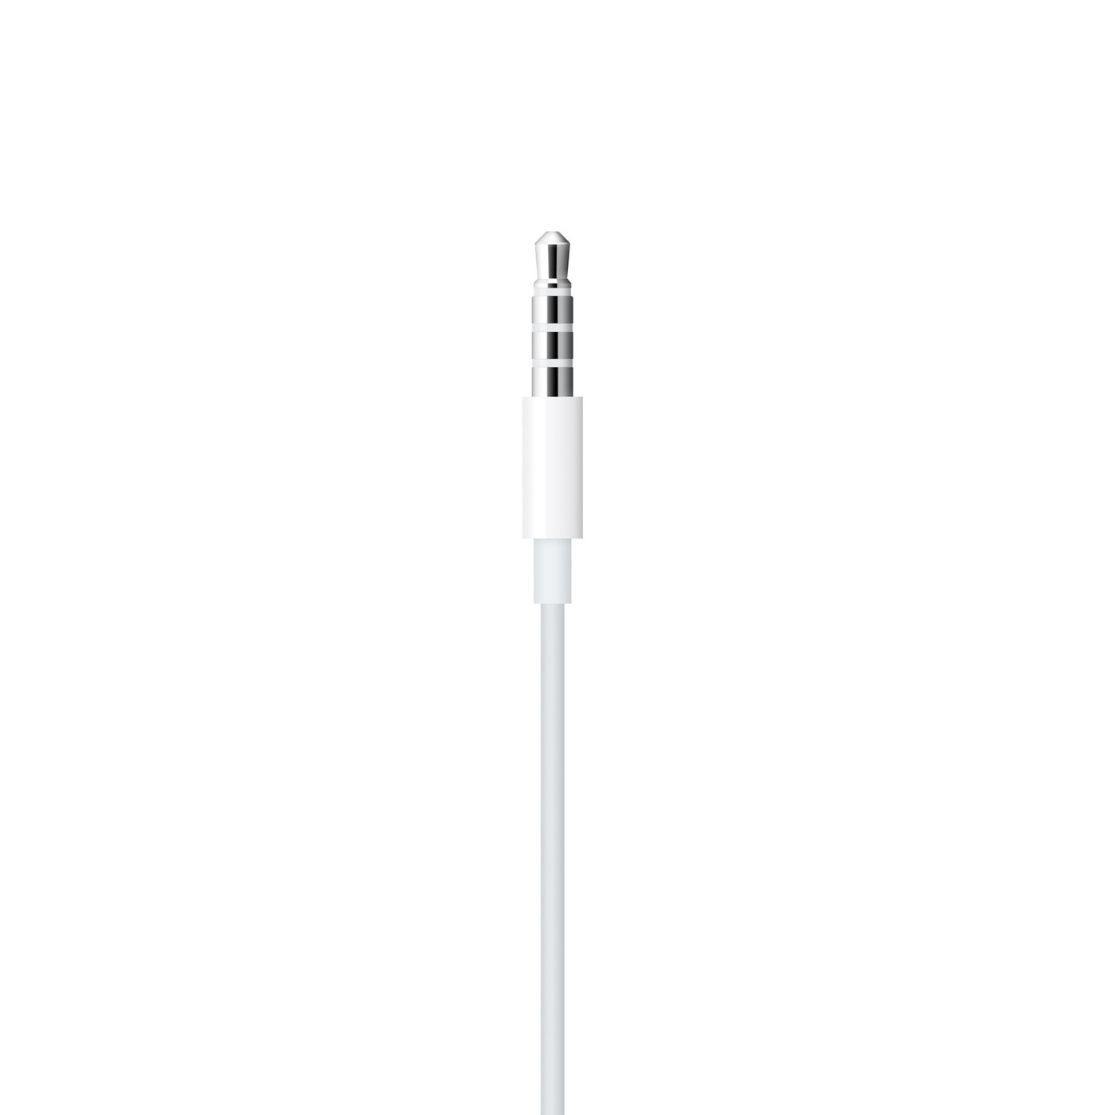 Apple EarPods with 3.5 mm Headphone Plug - QuickTech.in